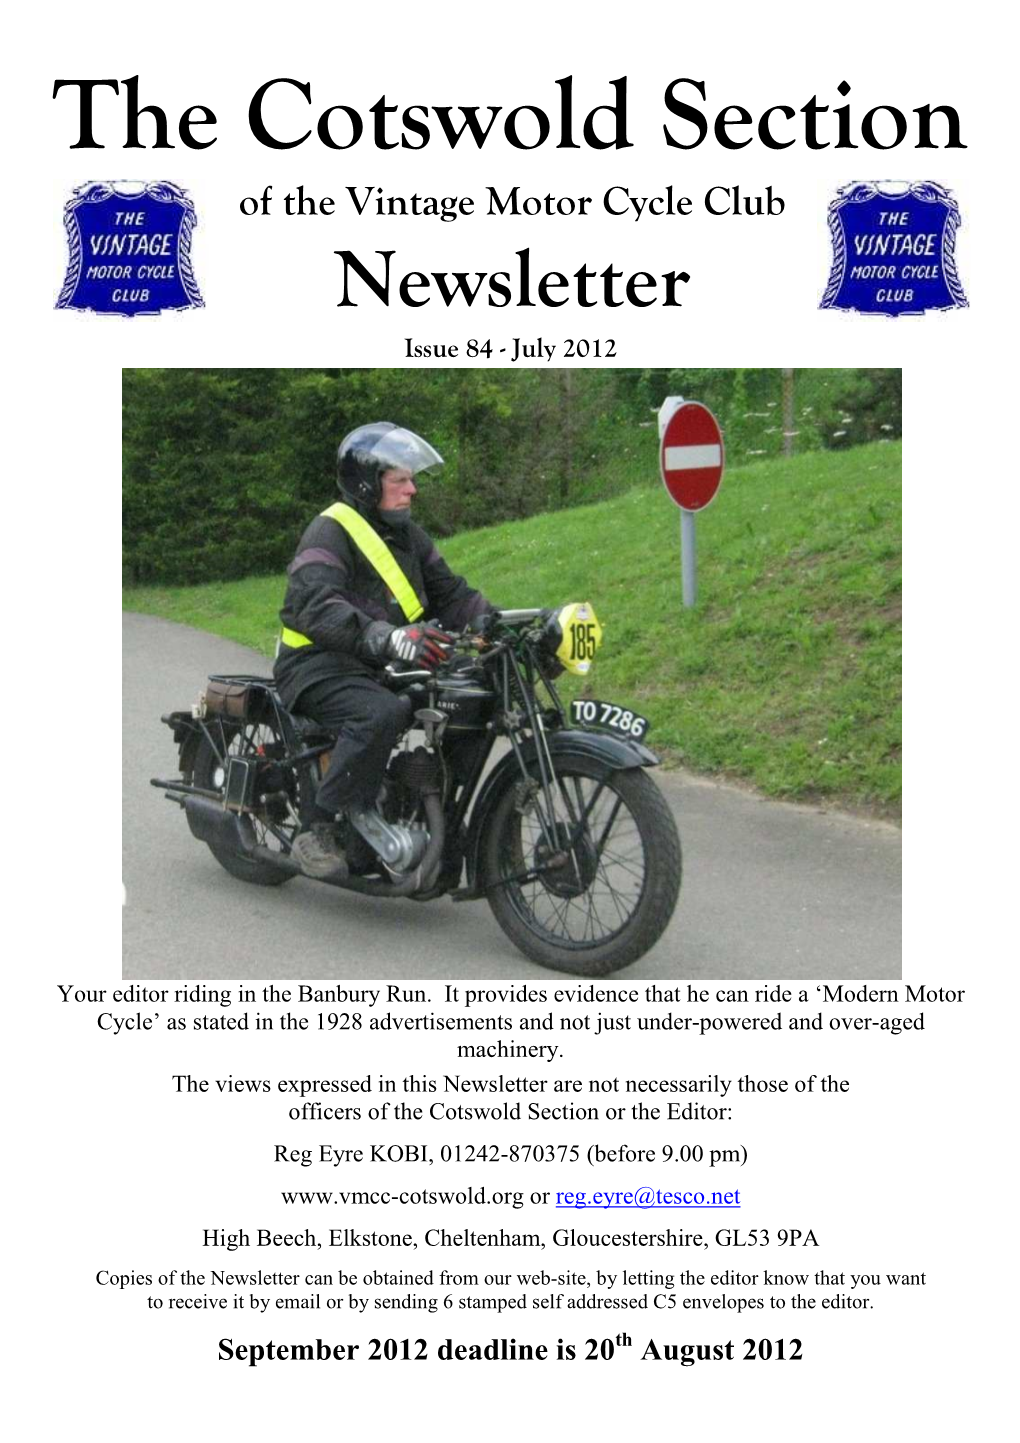 The Cotswold Section of the Vintage Motor Cycle Club